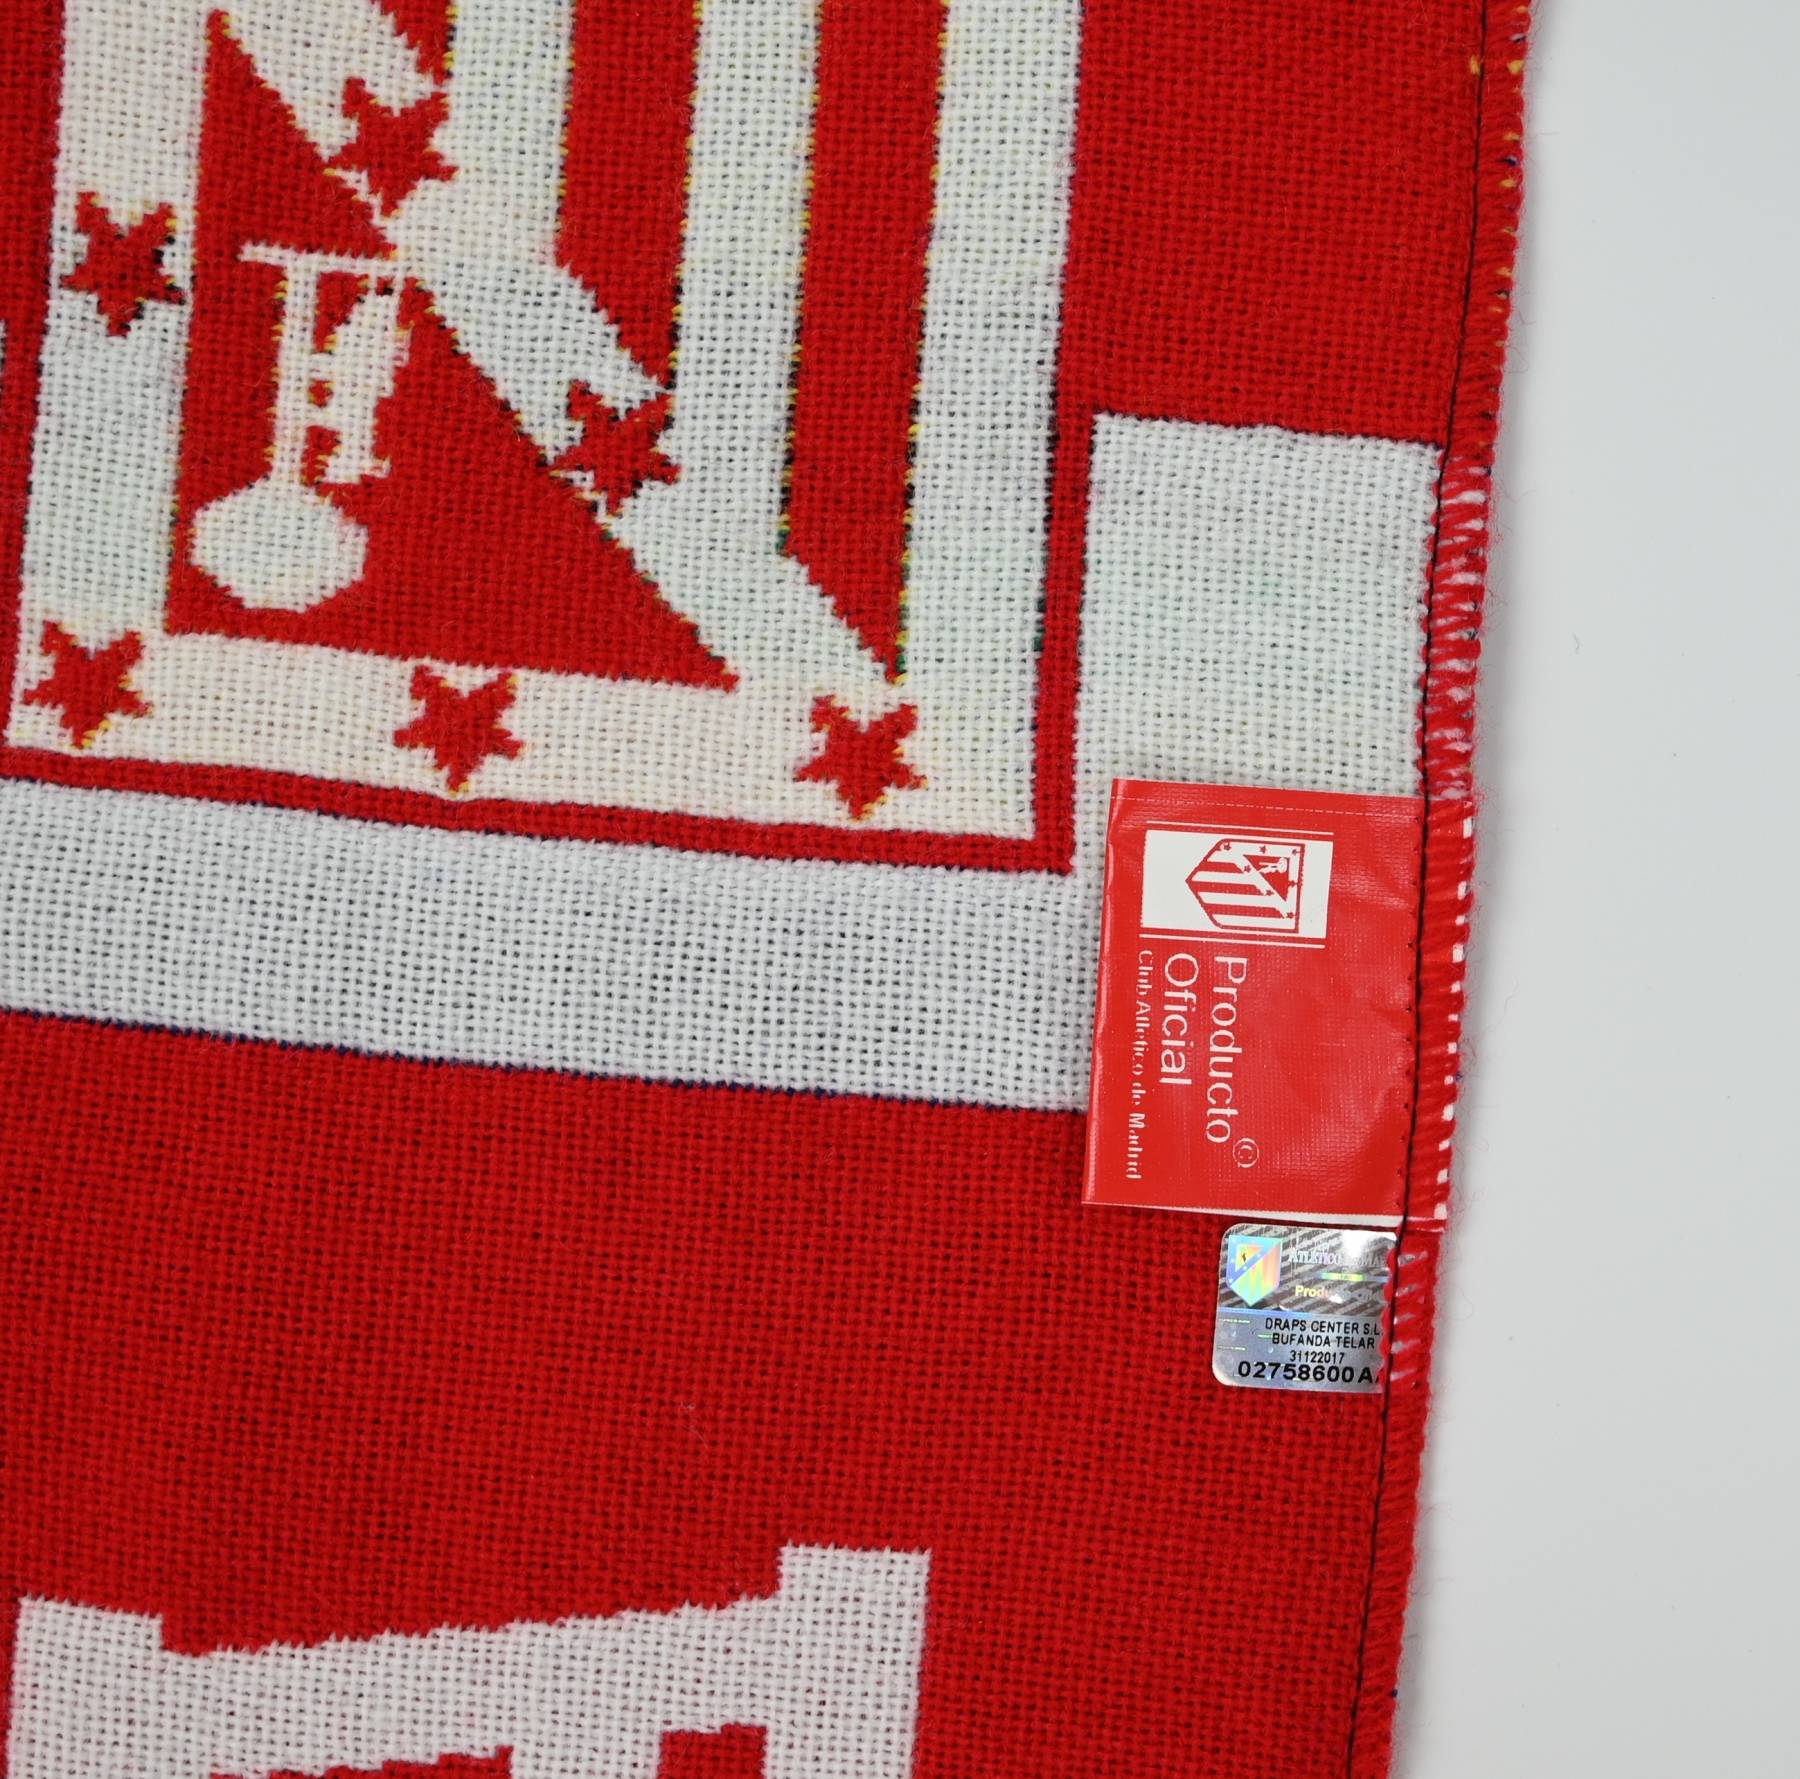 Atlético de Madrid Bar Scarf - Red/White - Adults